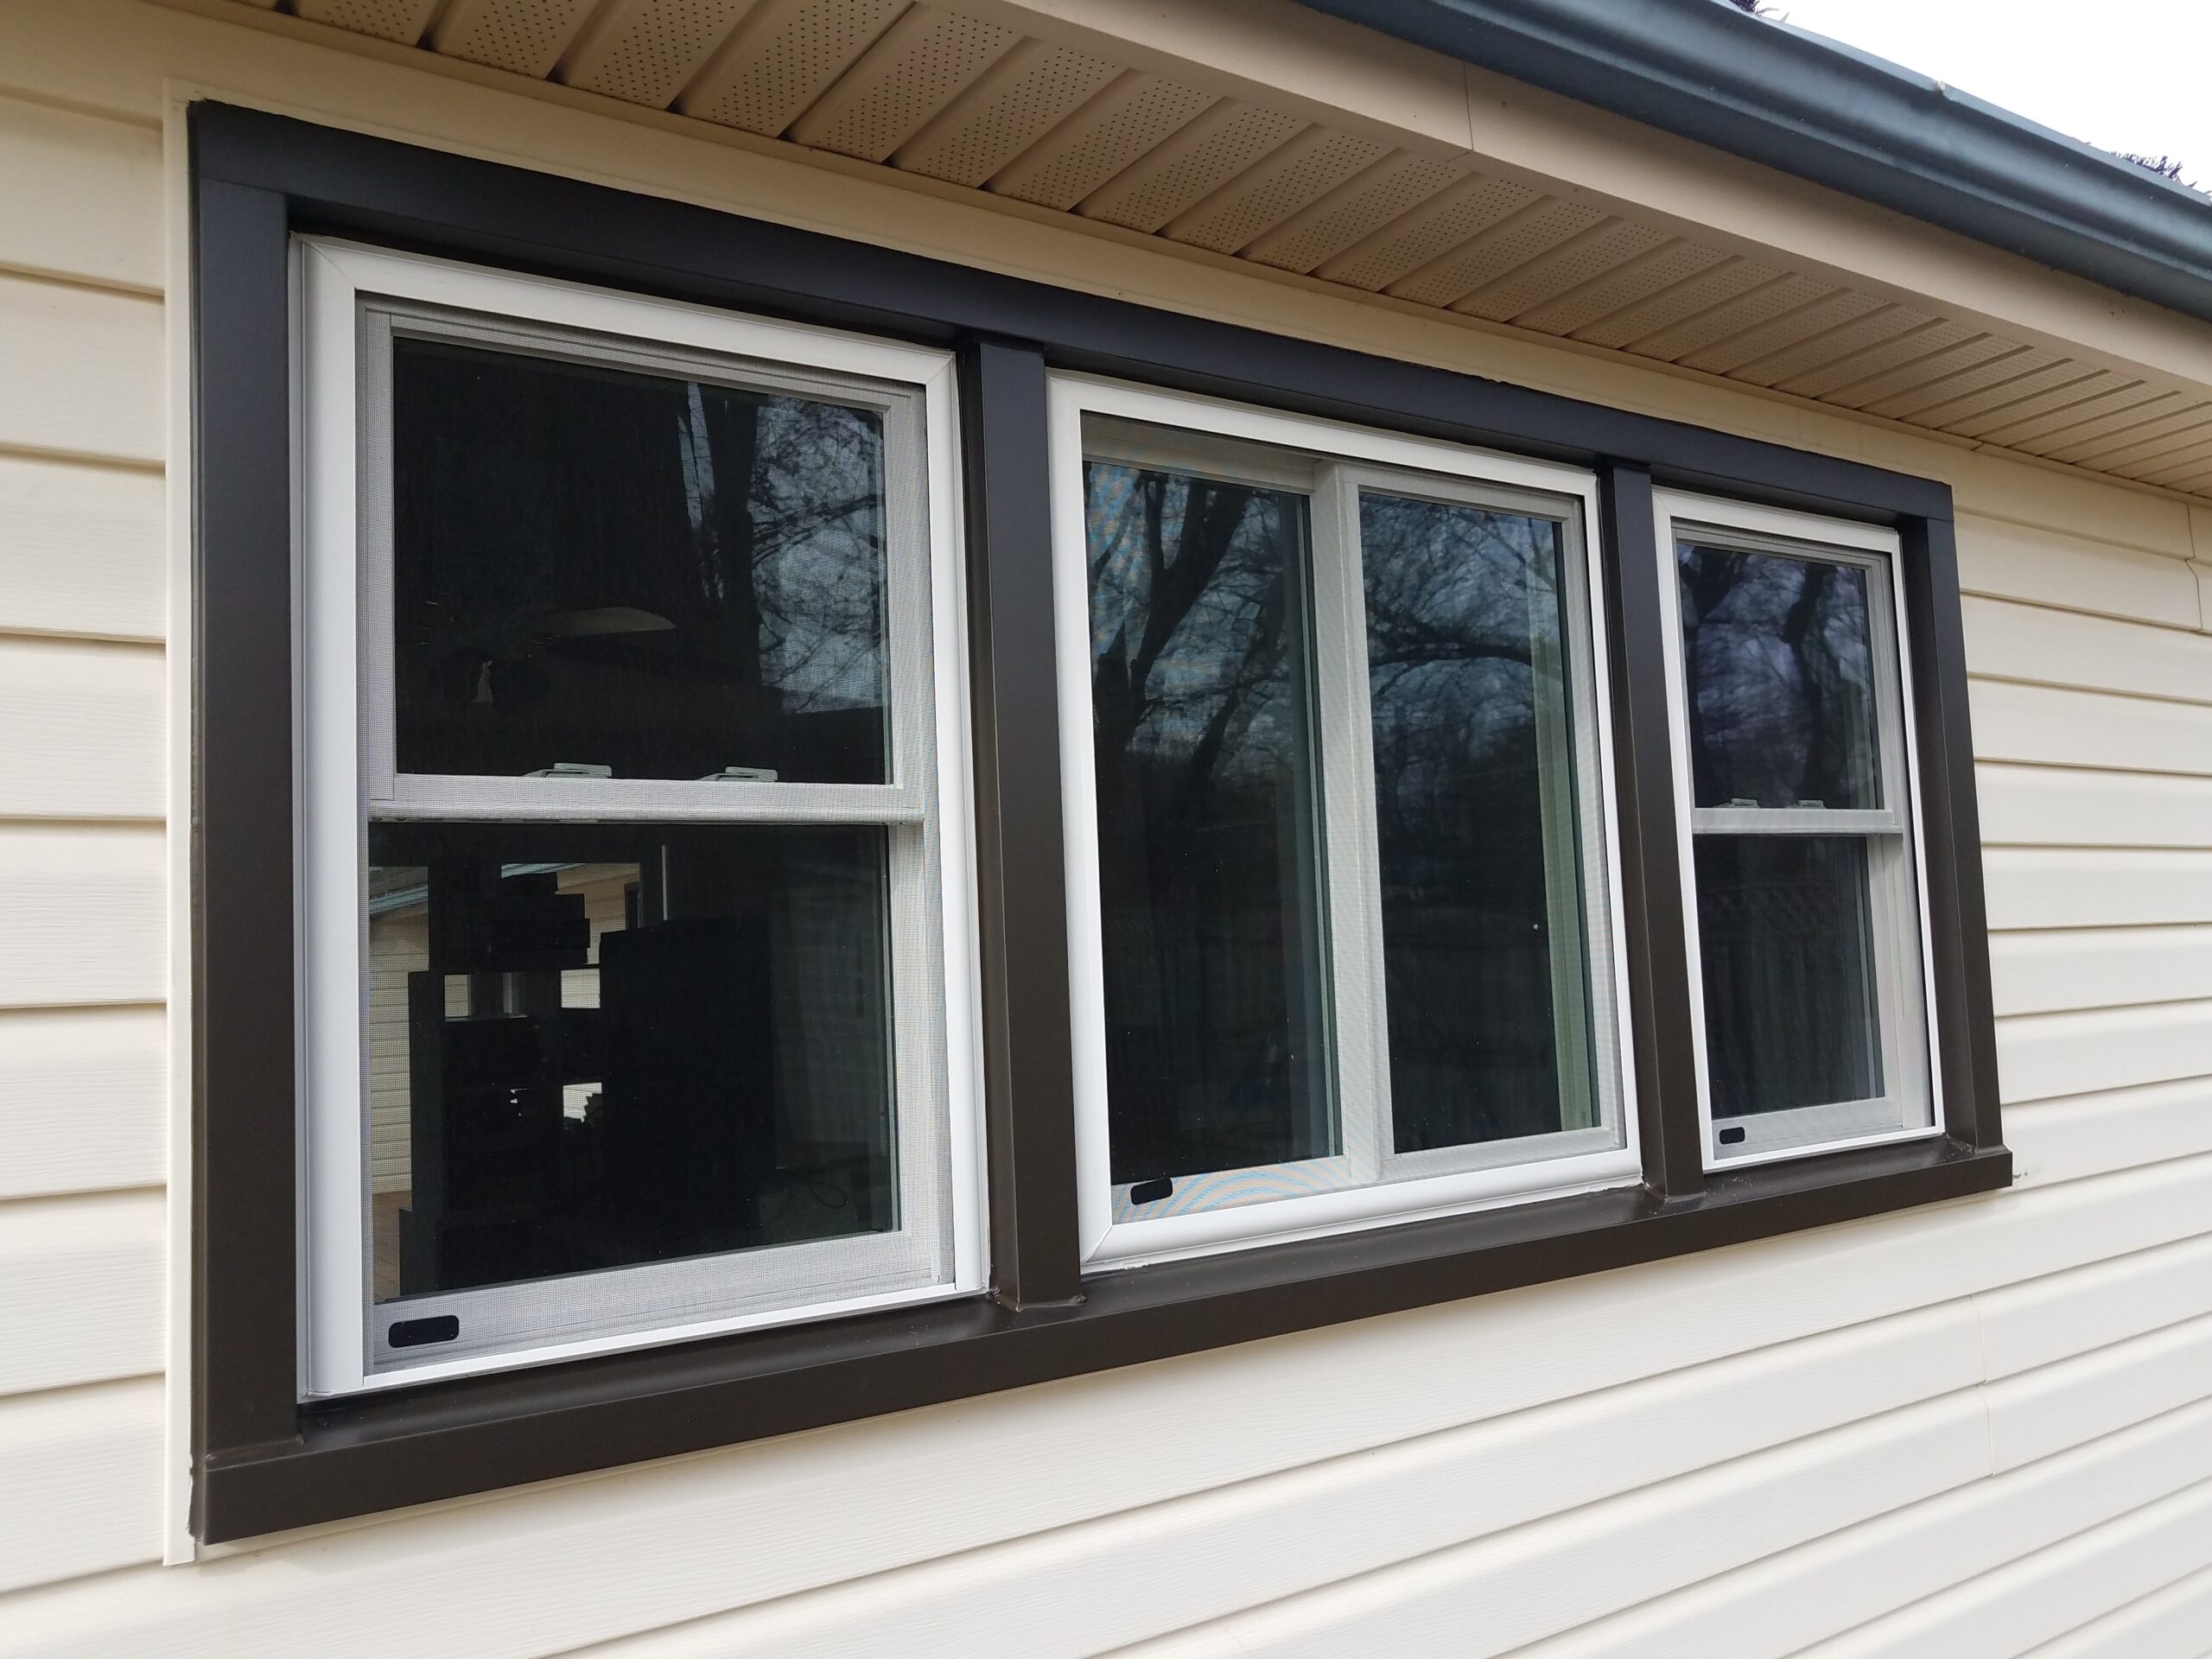 Exterior of new windows triple with white frames and black facing